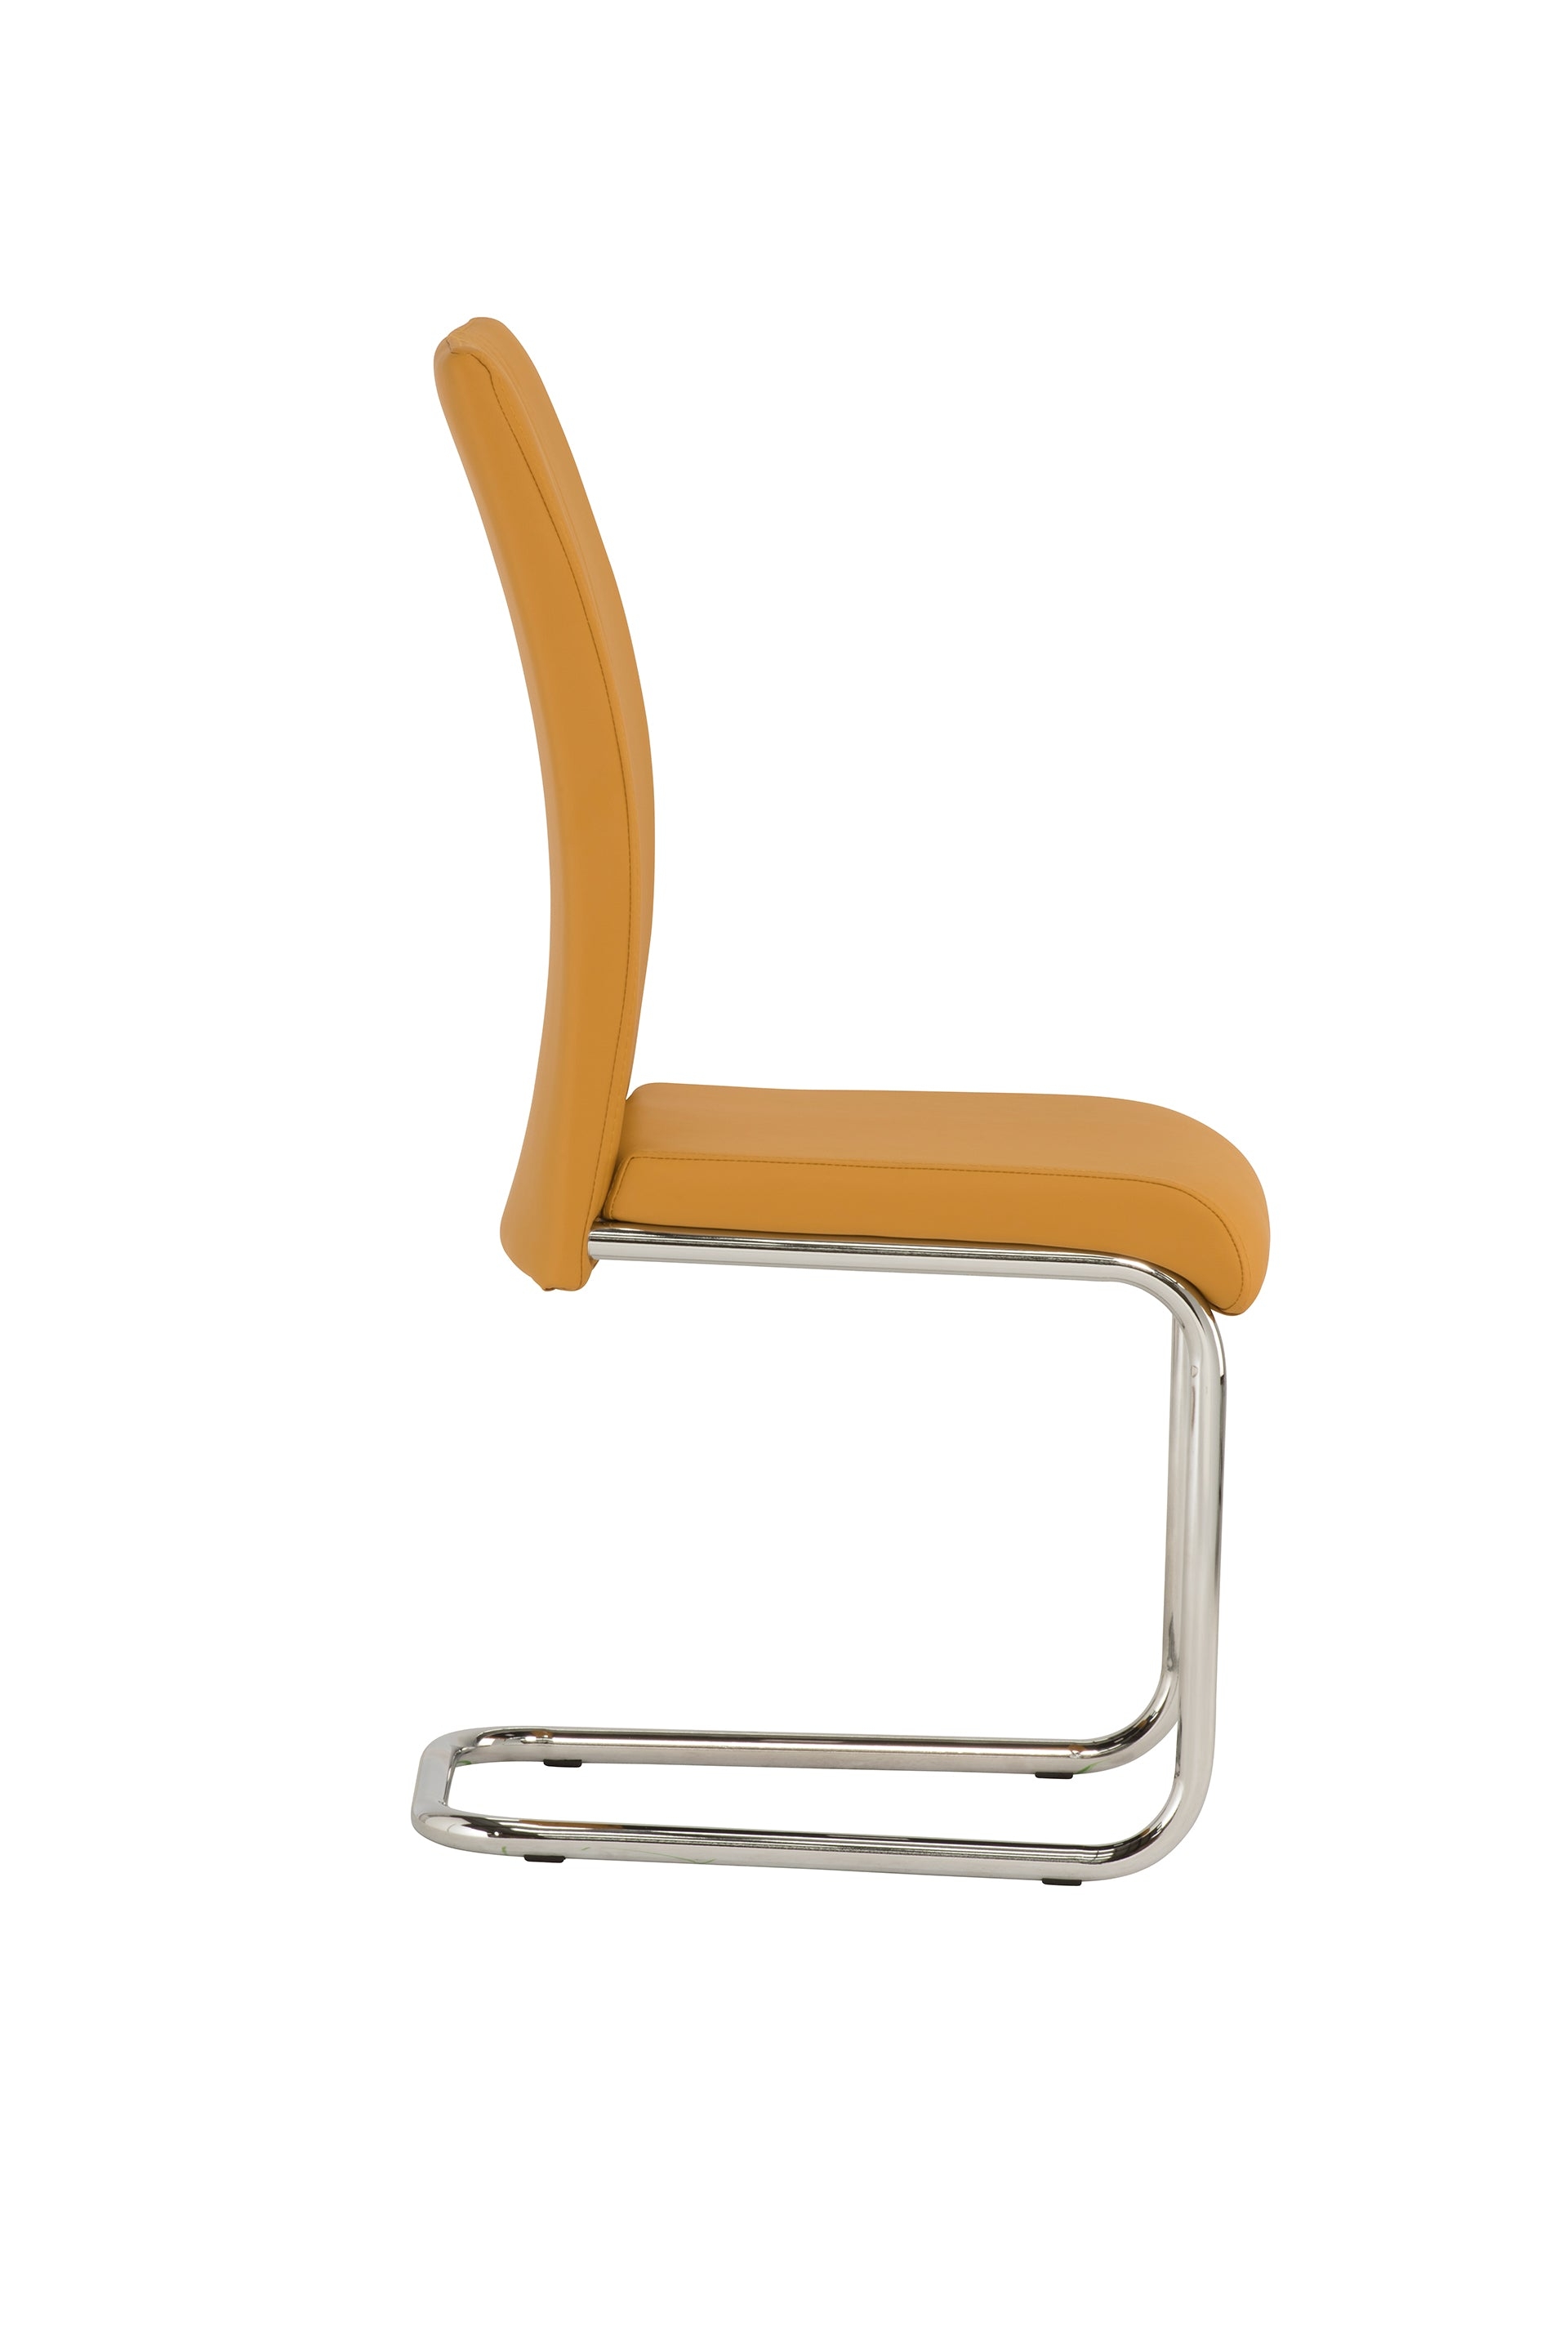 Marshow Pu Cantilever Dining Chair (Pairs), Mustard – Lc Living